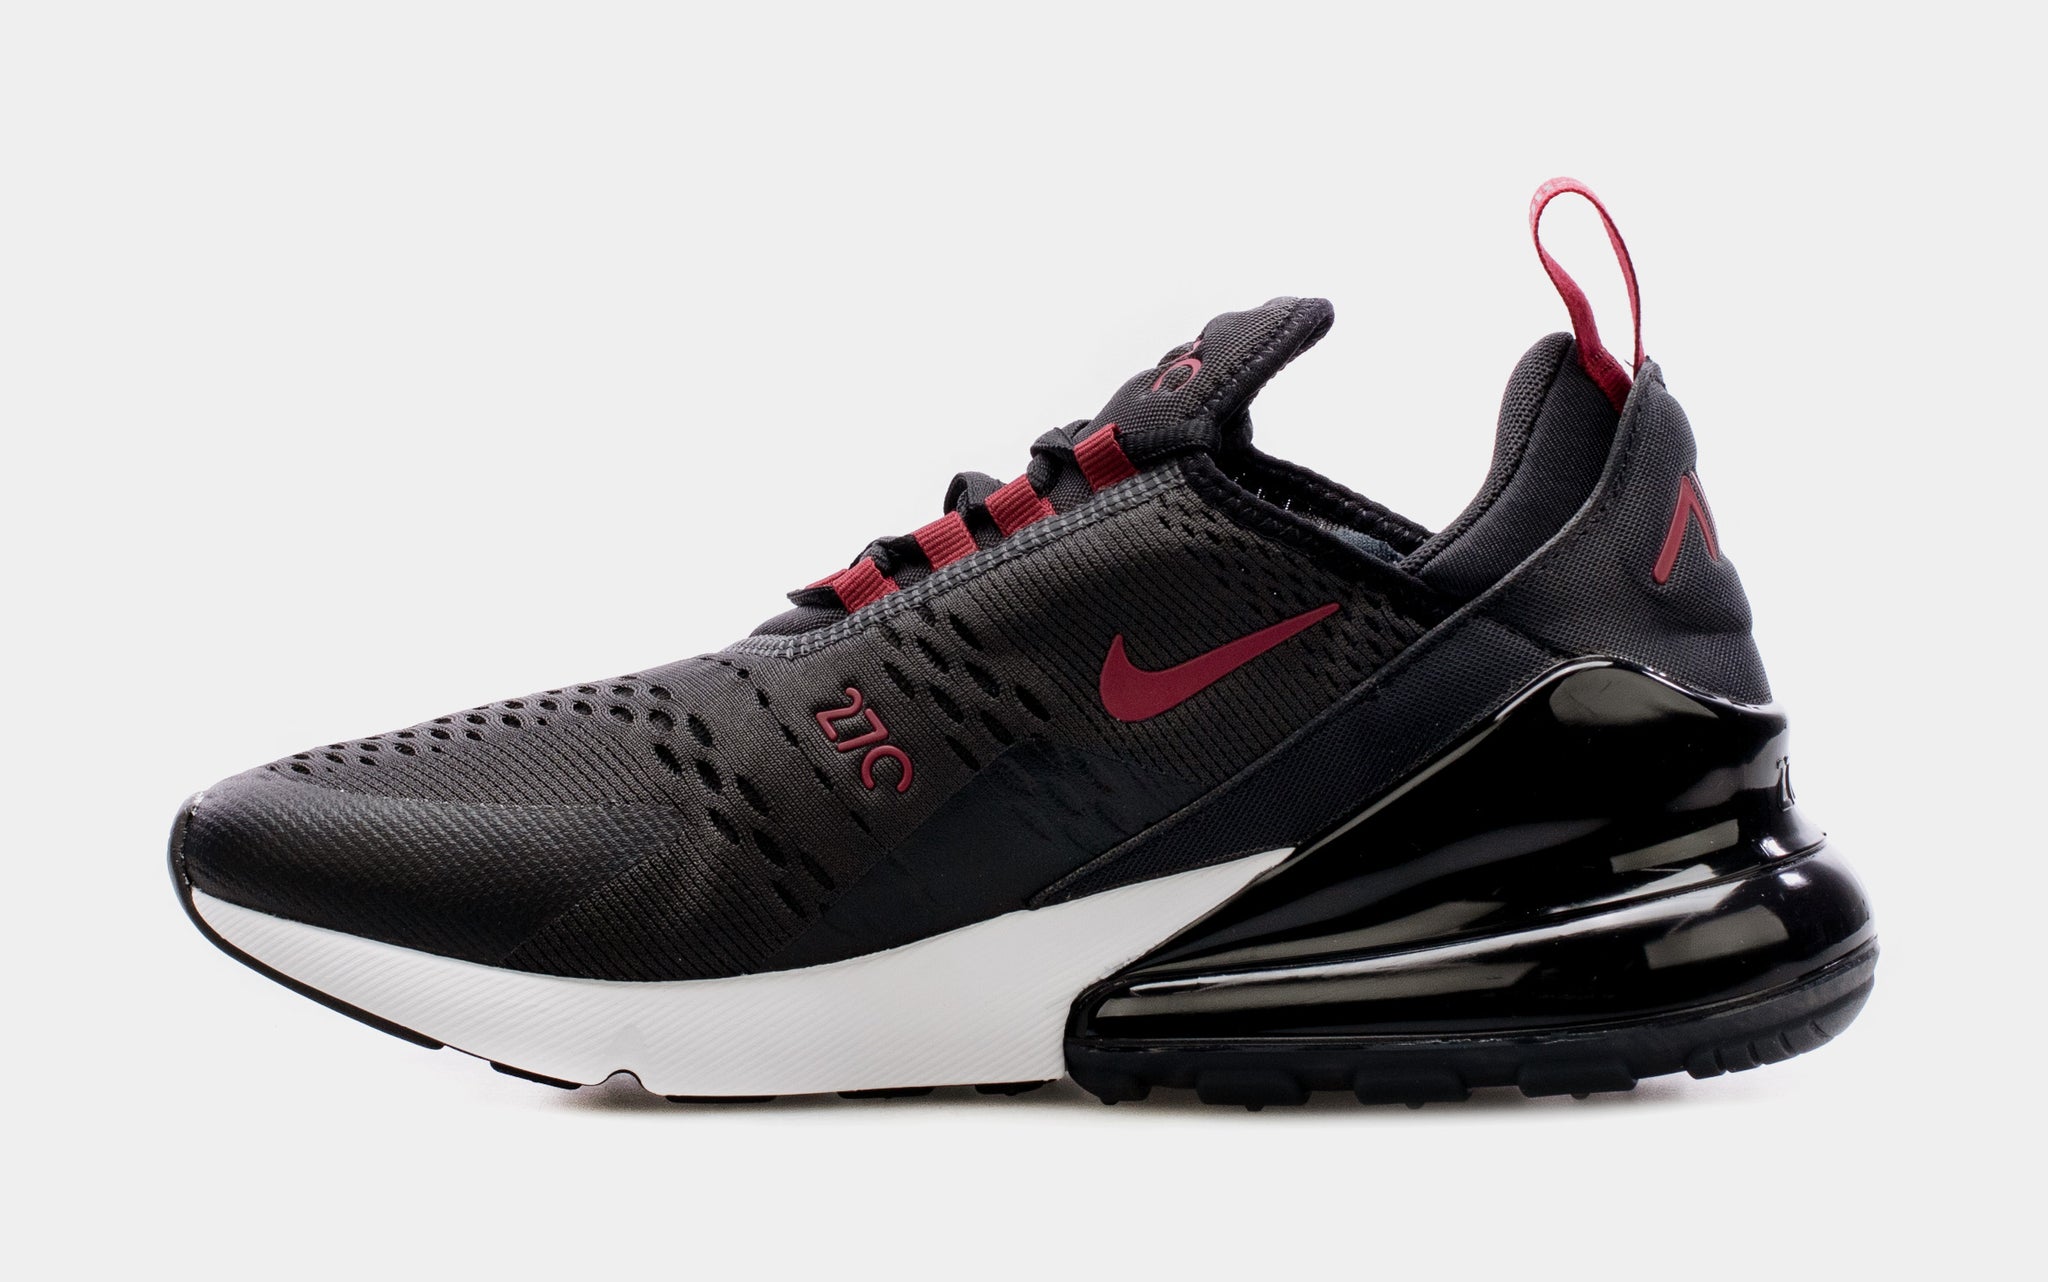 Nike Max 270 Mens Running Shoes Black Red DZ4402-001 – Shoe Palace